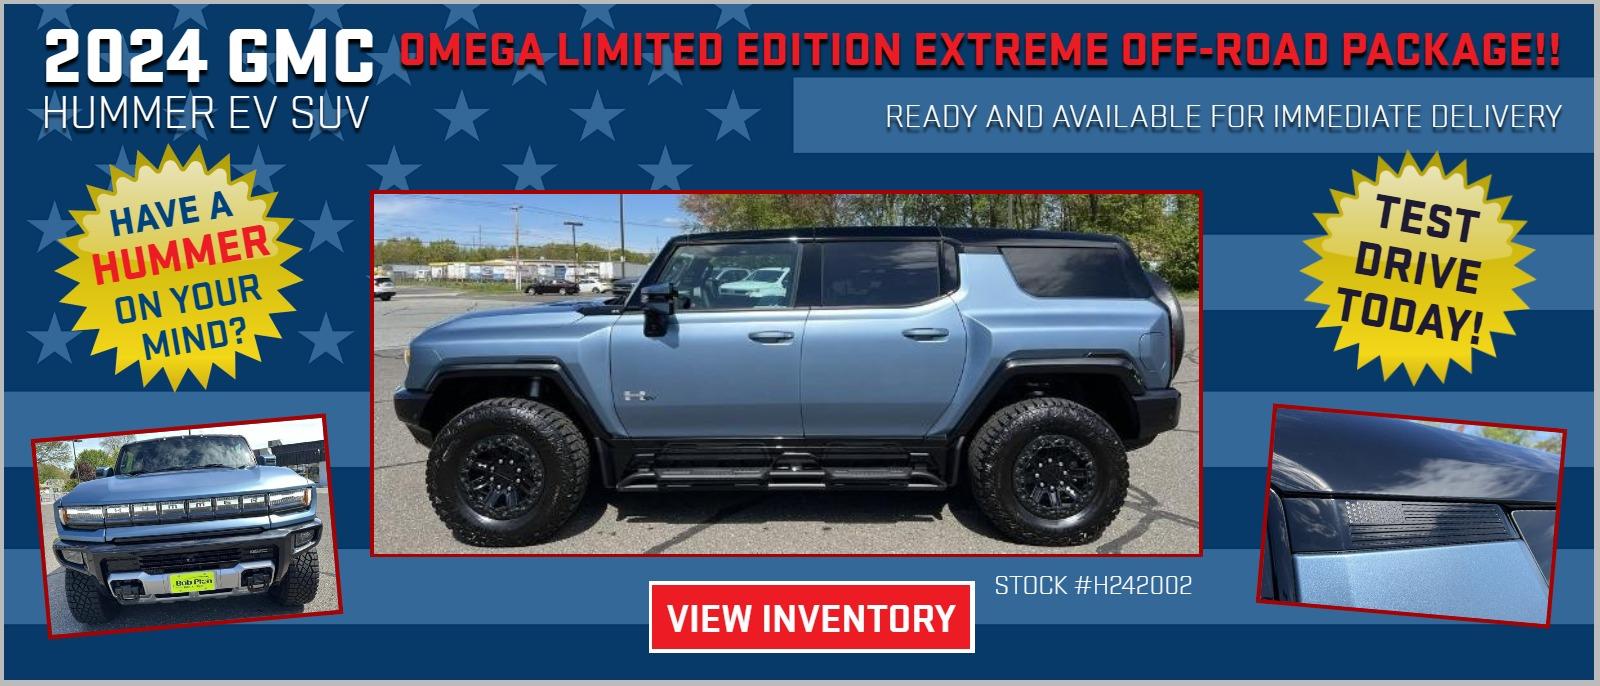 2024 GMC HUMMER EV SUV OMEGA EDITION EXTREME OFF-ROAD PACKAGE FROM BOB PION BUICK GMC